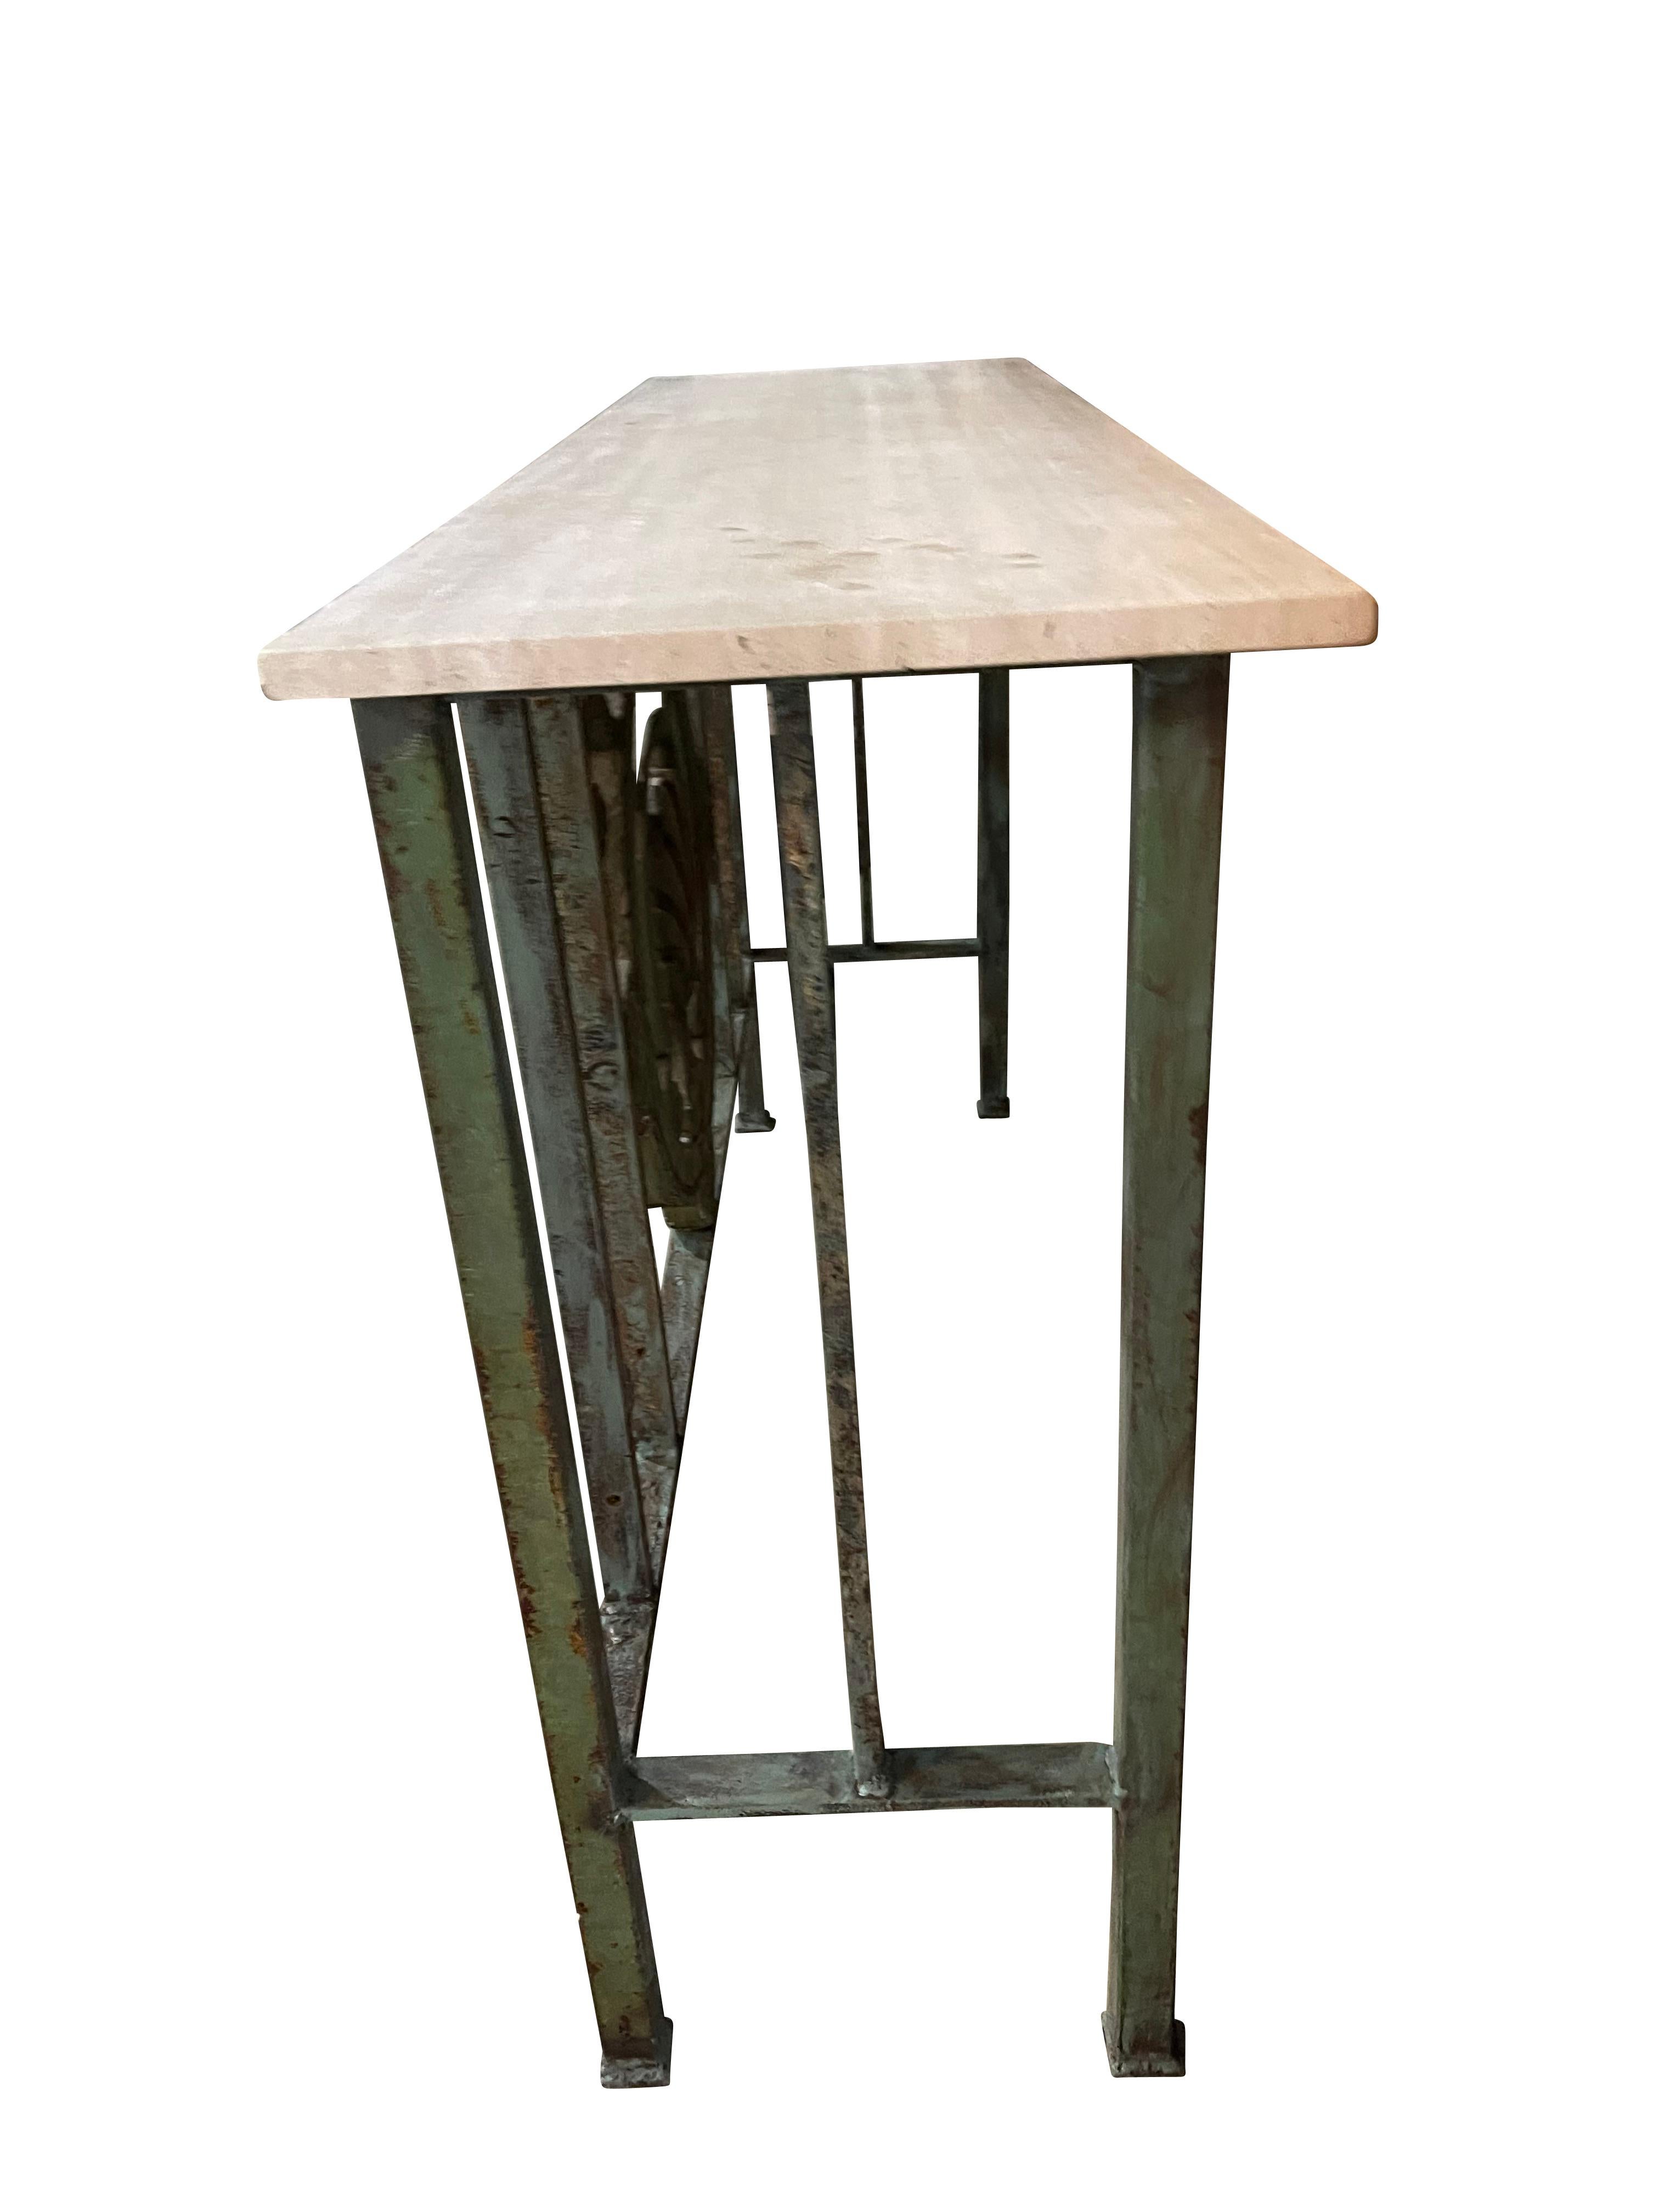 Green Cast Iron Console  Table with Shell Motif  and Travertine Marble Top  In Good Condition For Sale In Essex, MA